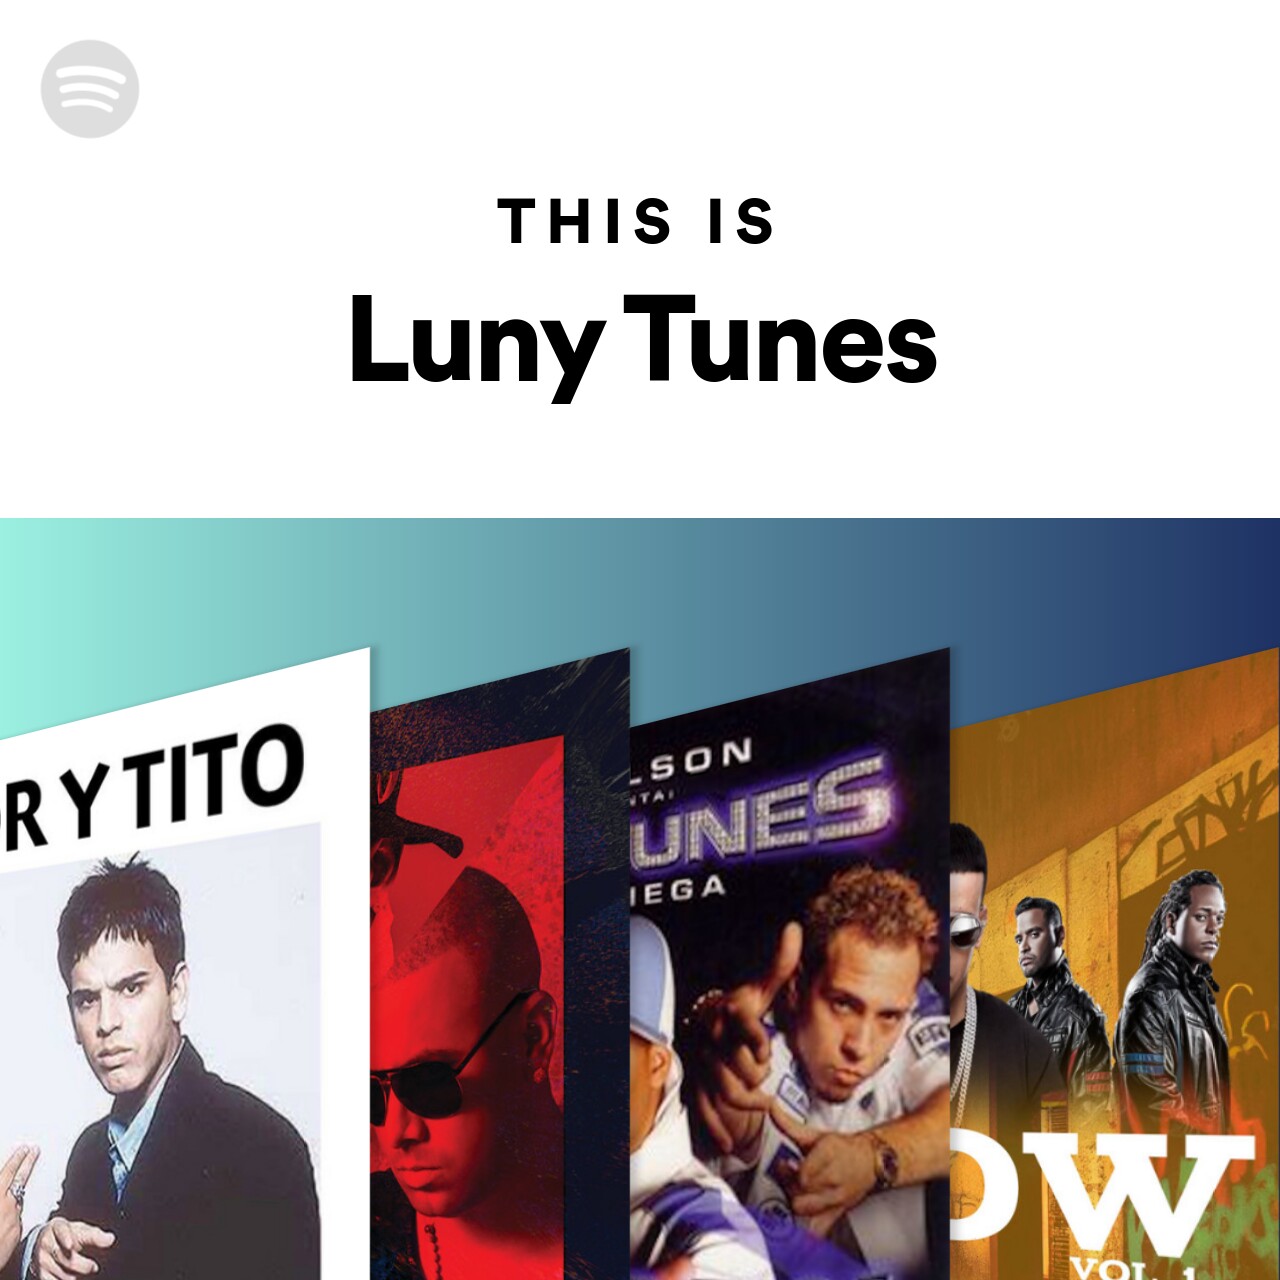 This Is Luny Tunes